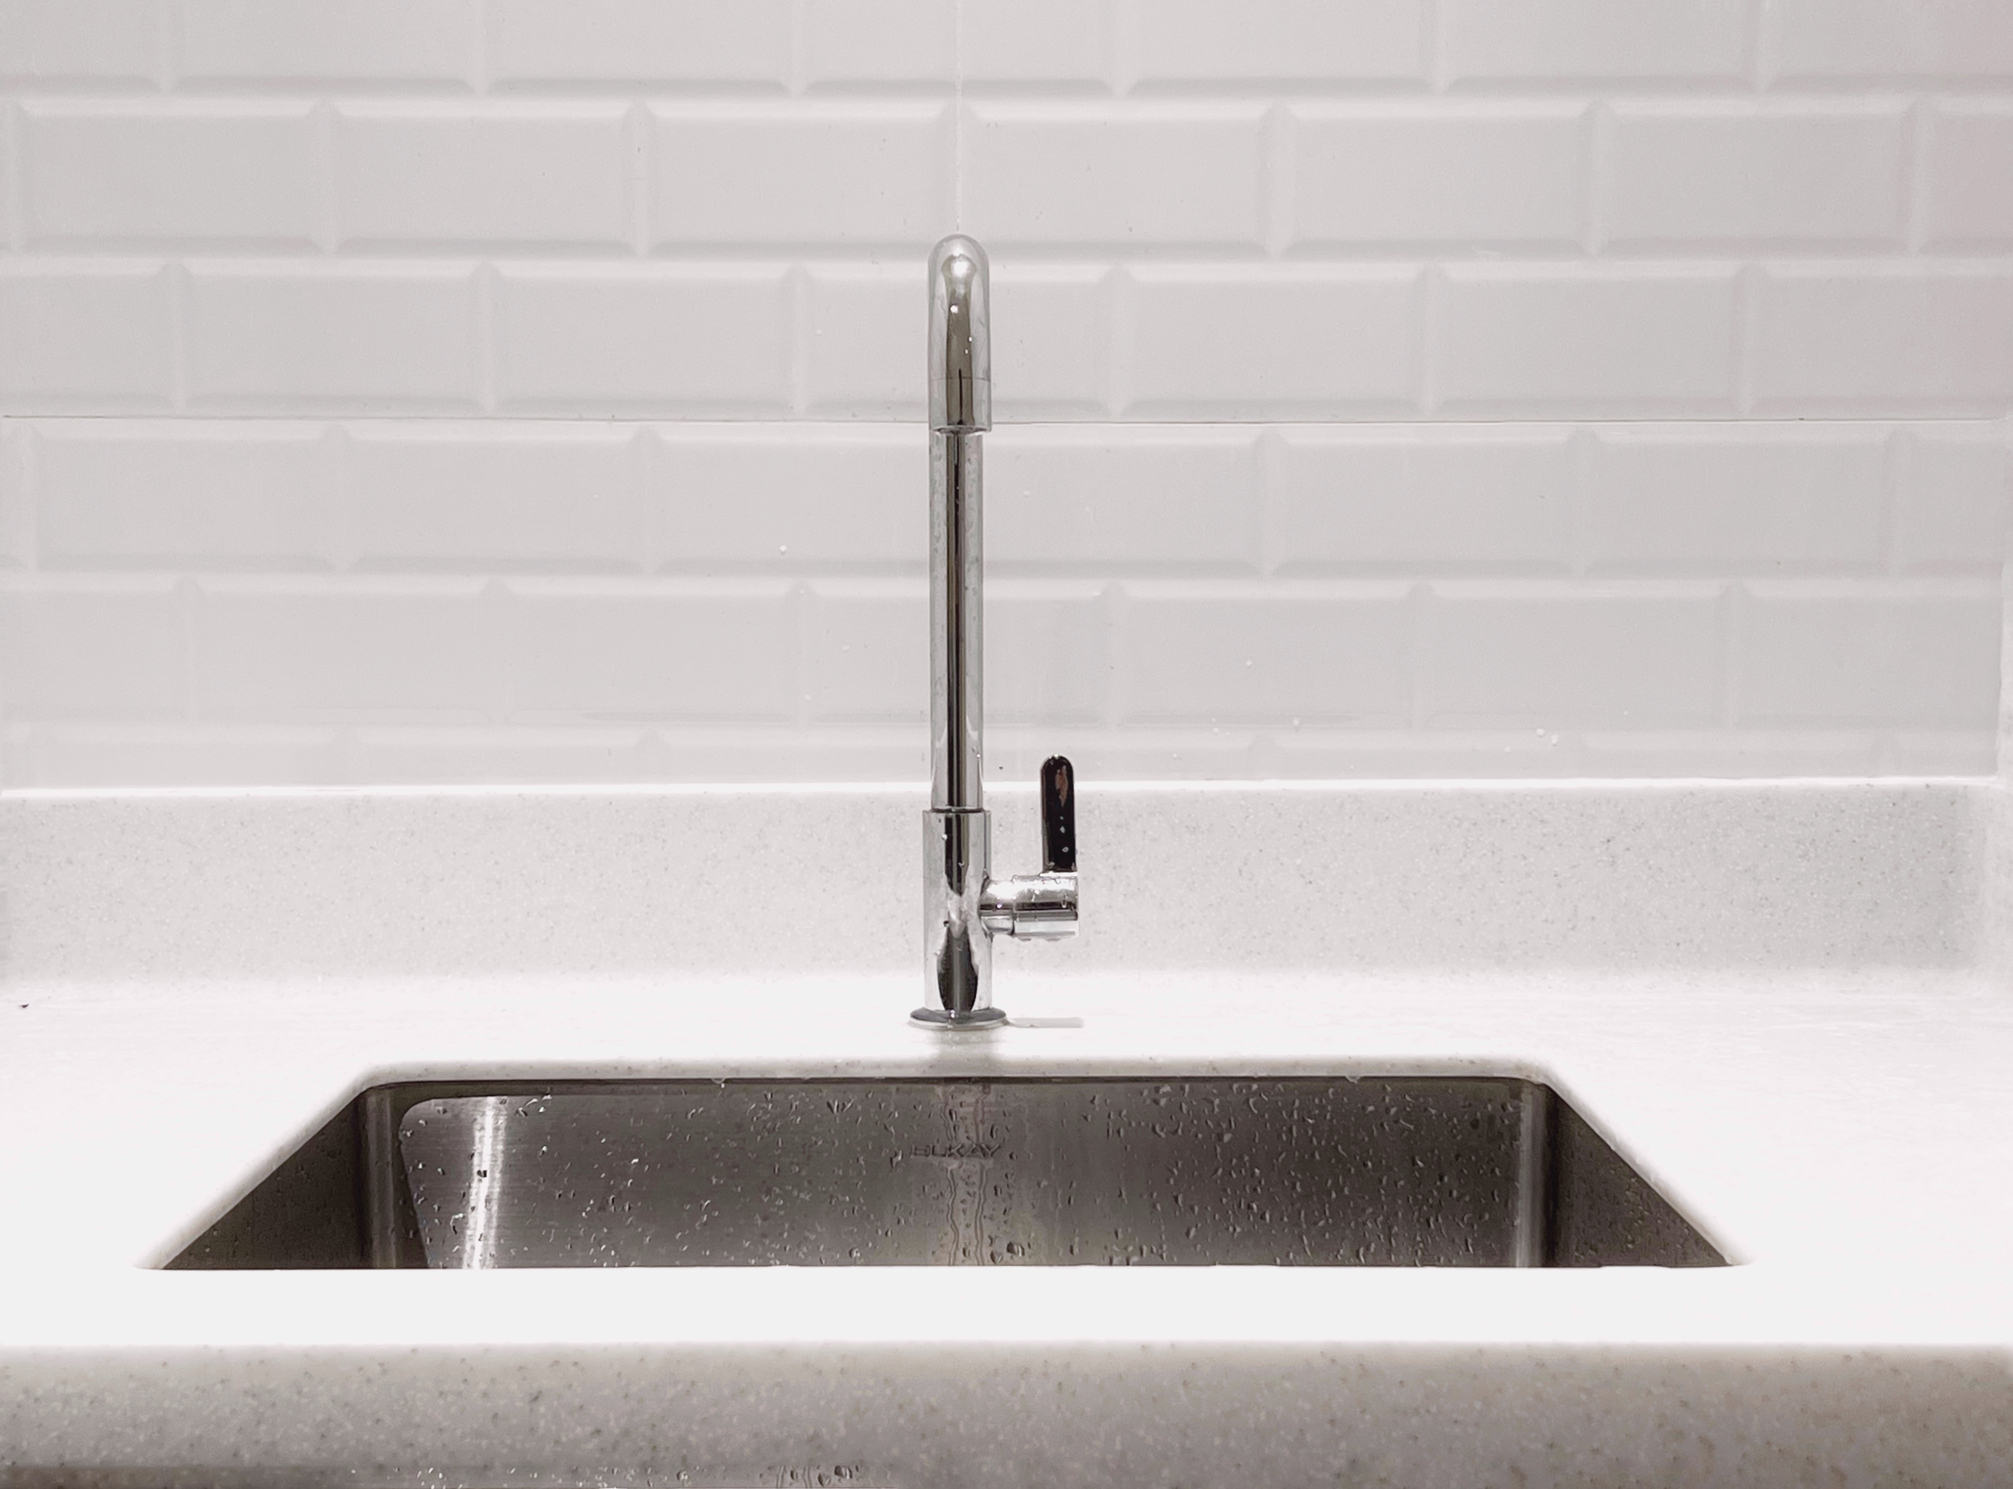 Stainless steel kitchen sink and faucet against a white tile backsplash